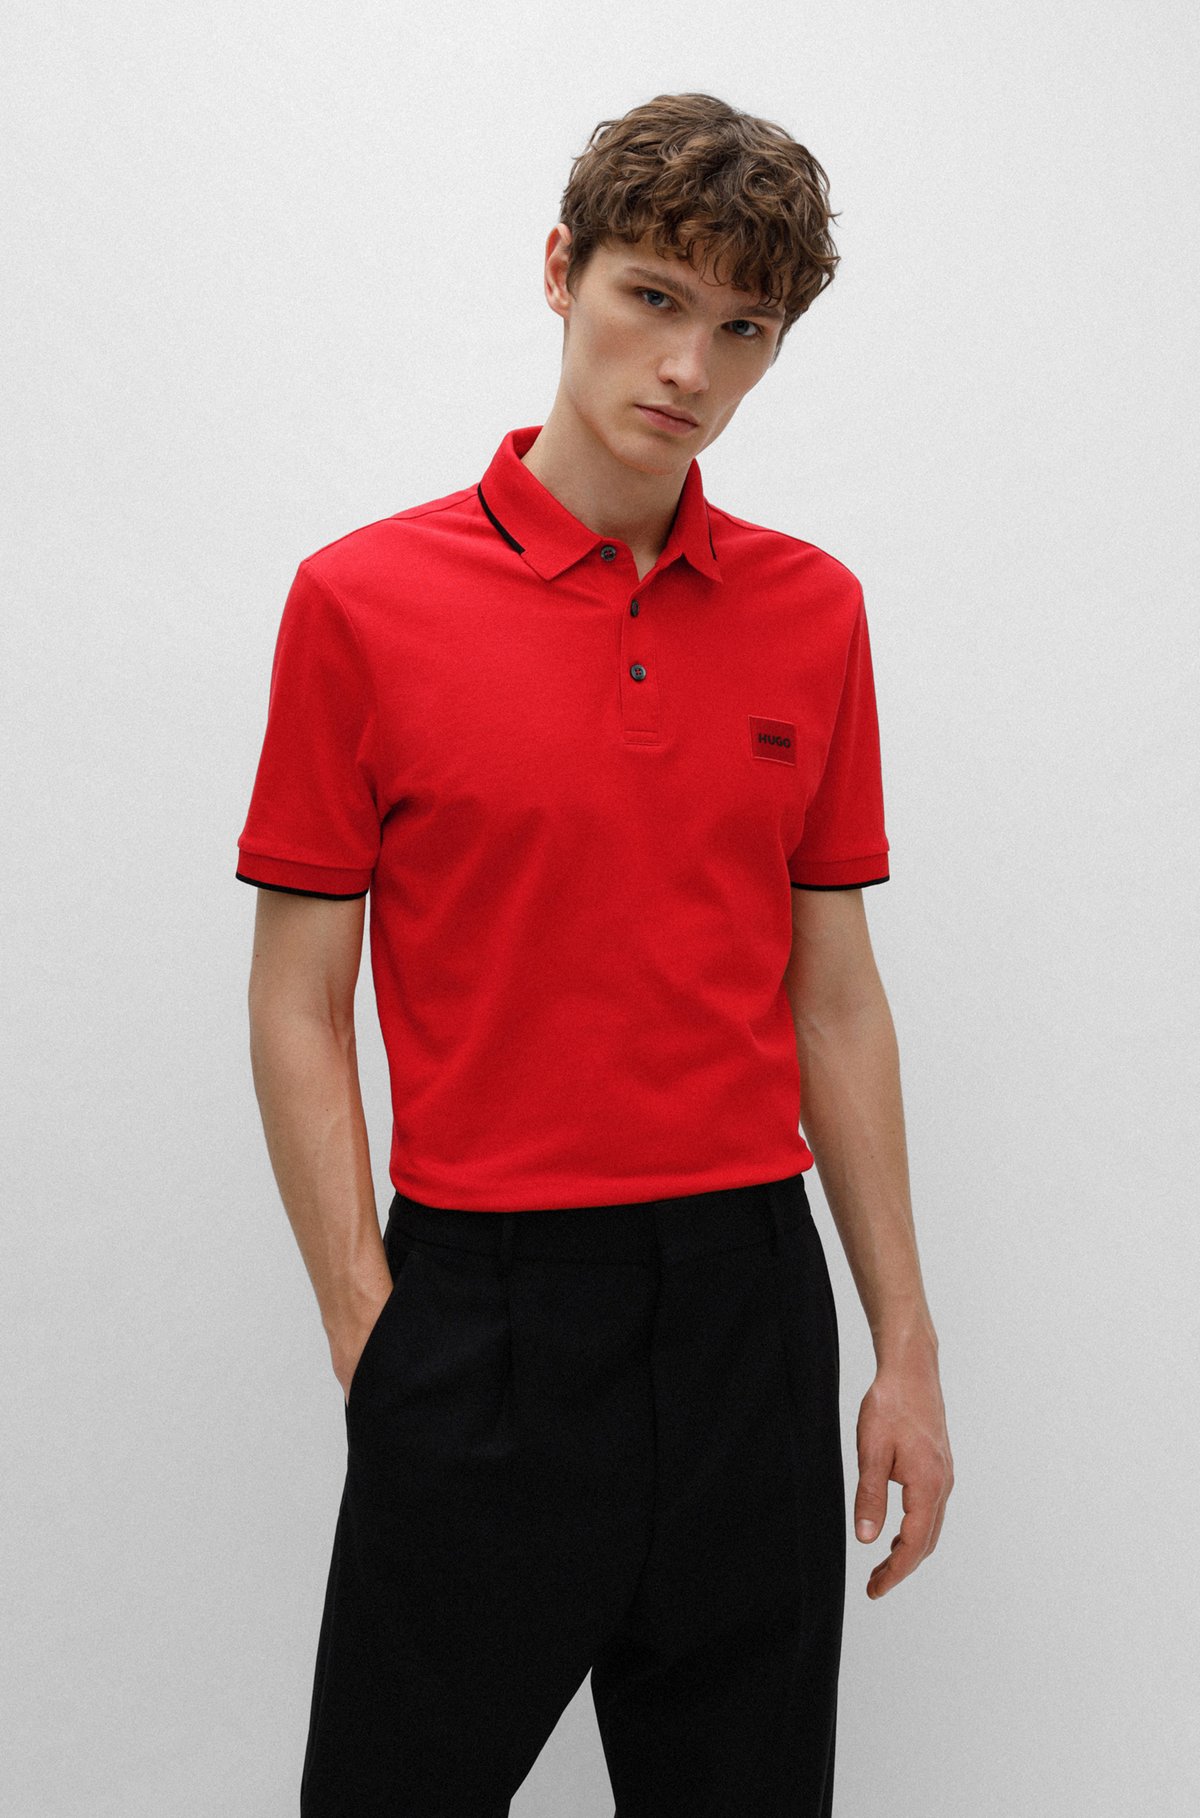 Cotton-piqué with shirt label slim-fit red HUGO polo - logo